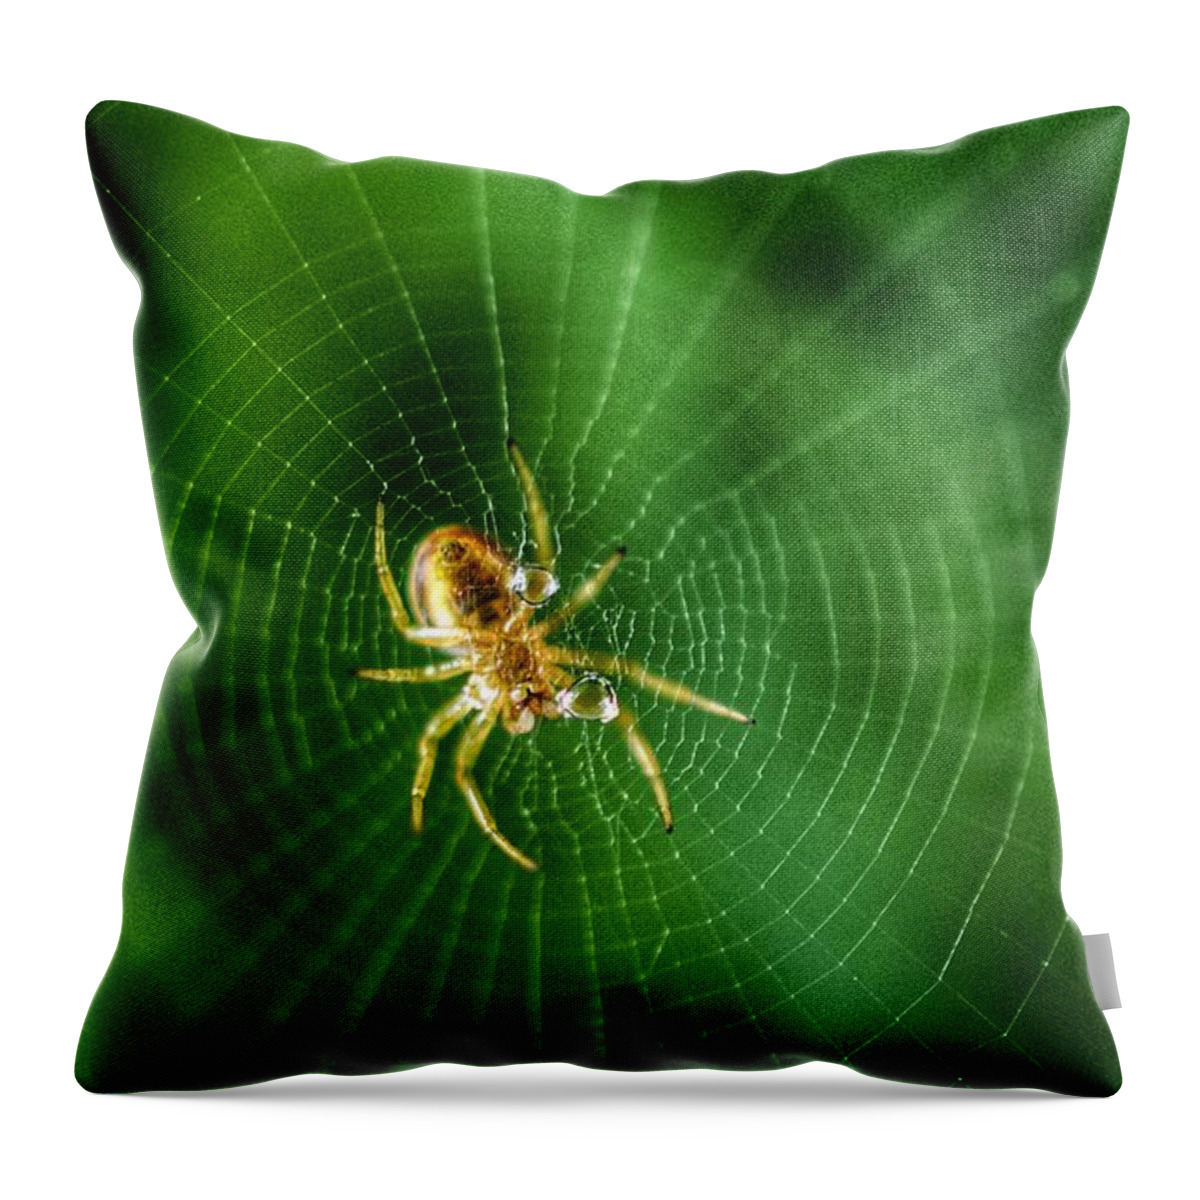 Photo Throw Pillow featuring the photograph The Itsy Bitsy Spider by Evan Foster